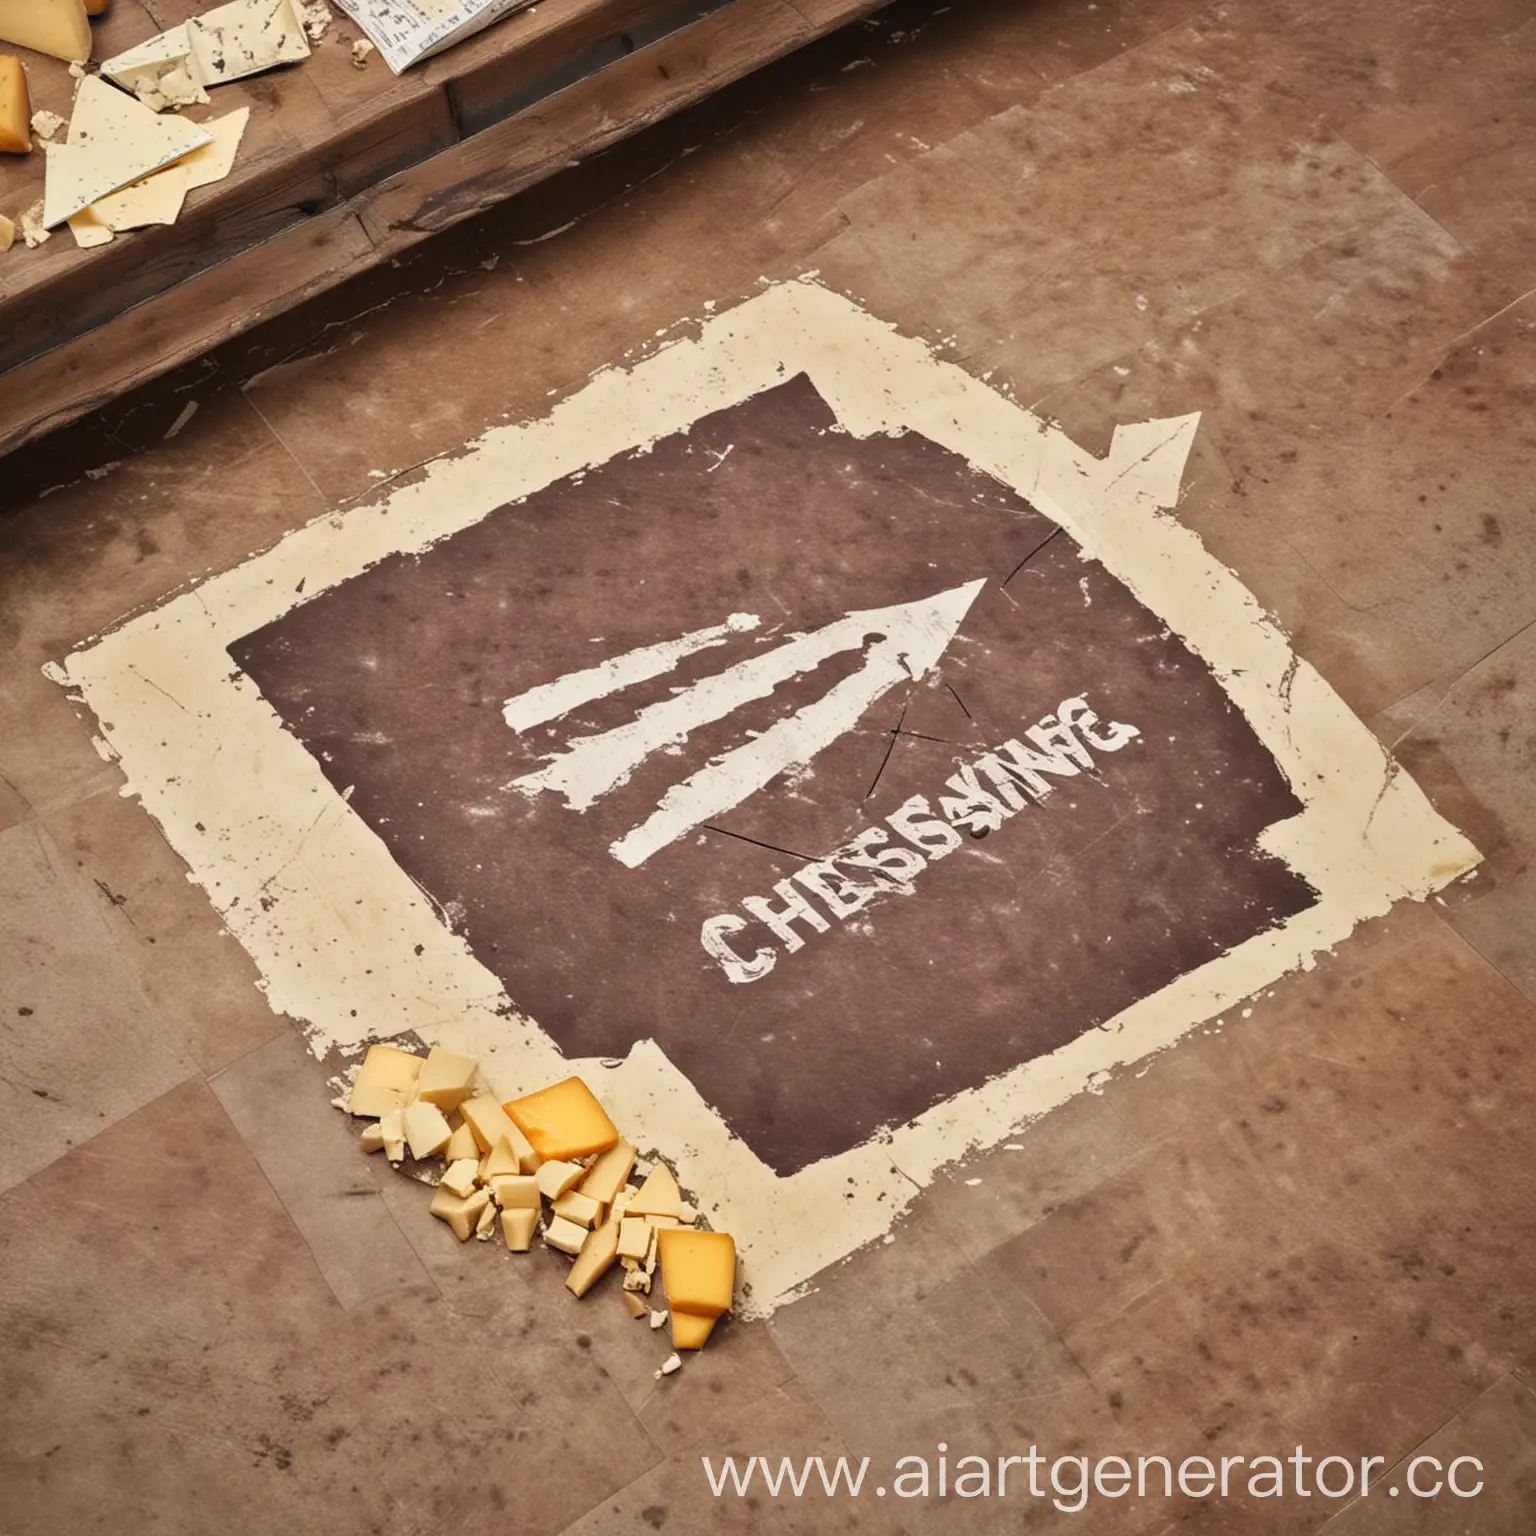 Artisanal-Cheesemaking-Demonstration-with-Store-Direction-Arrow